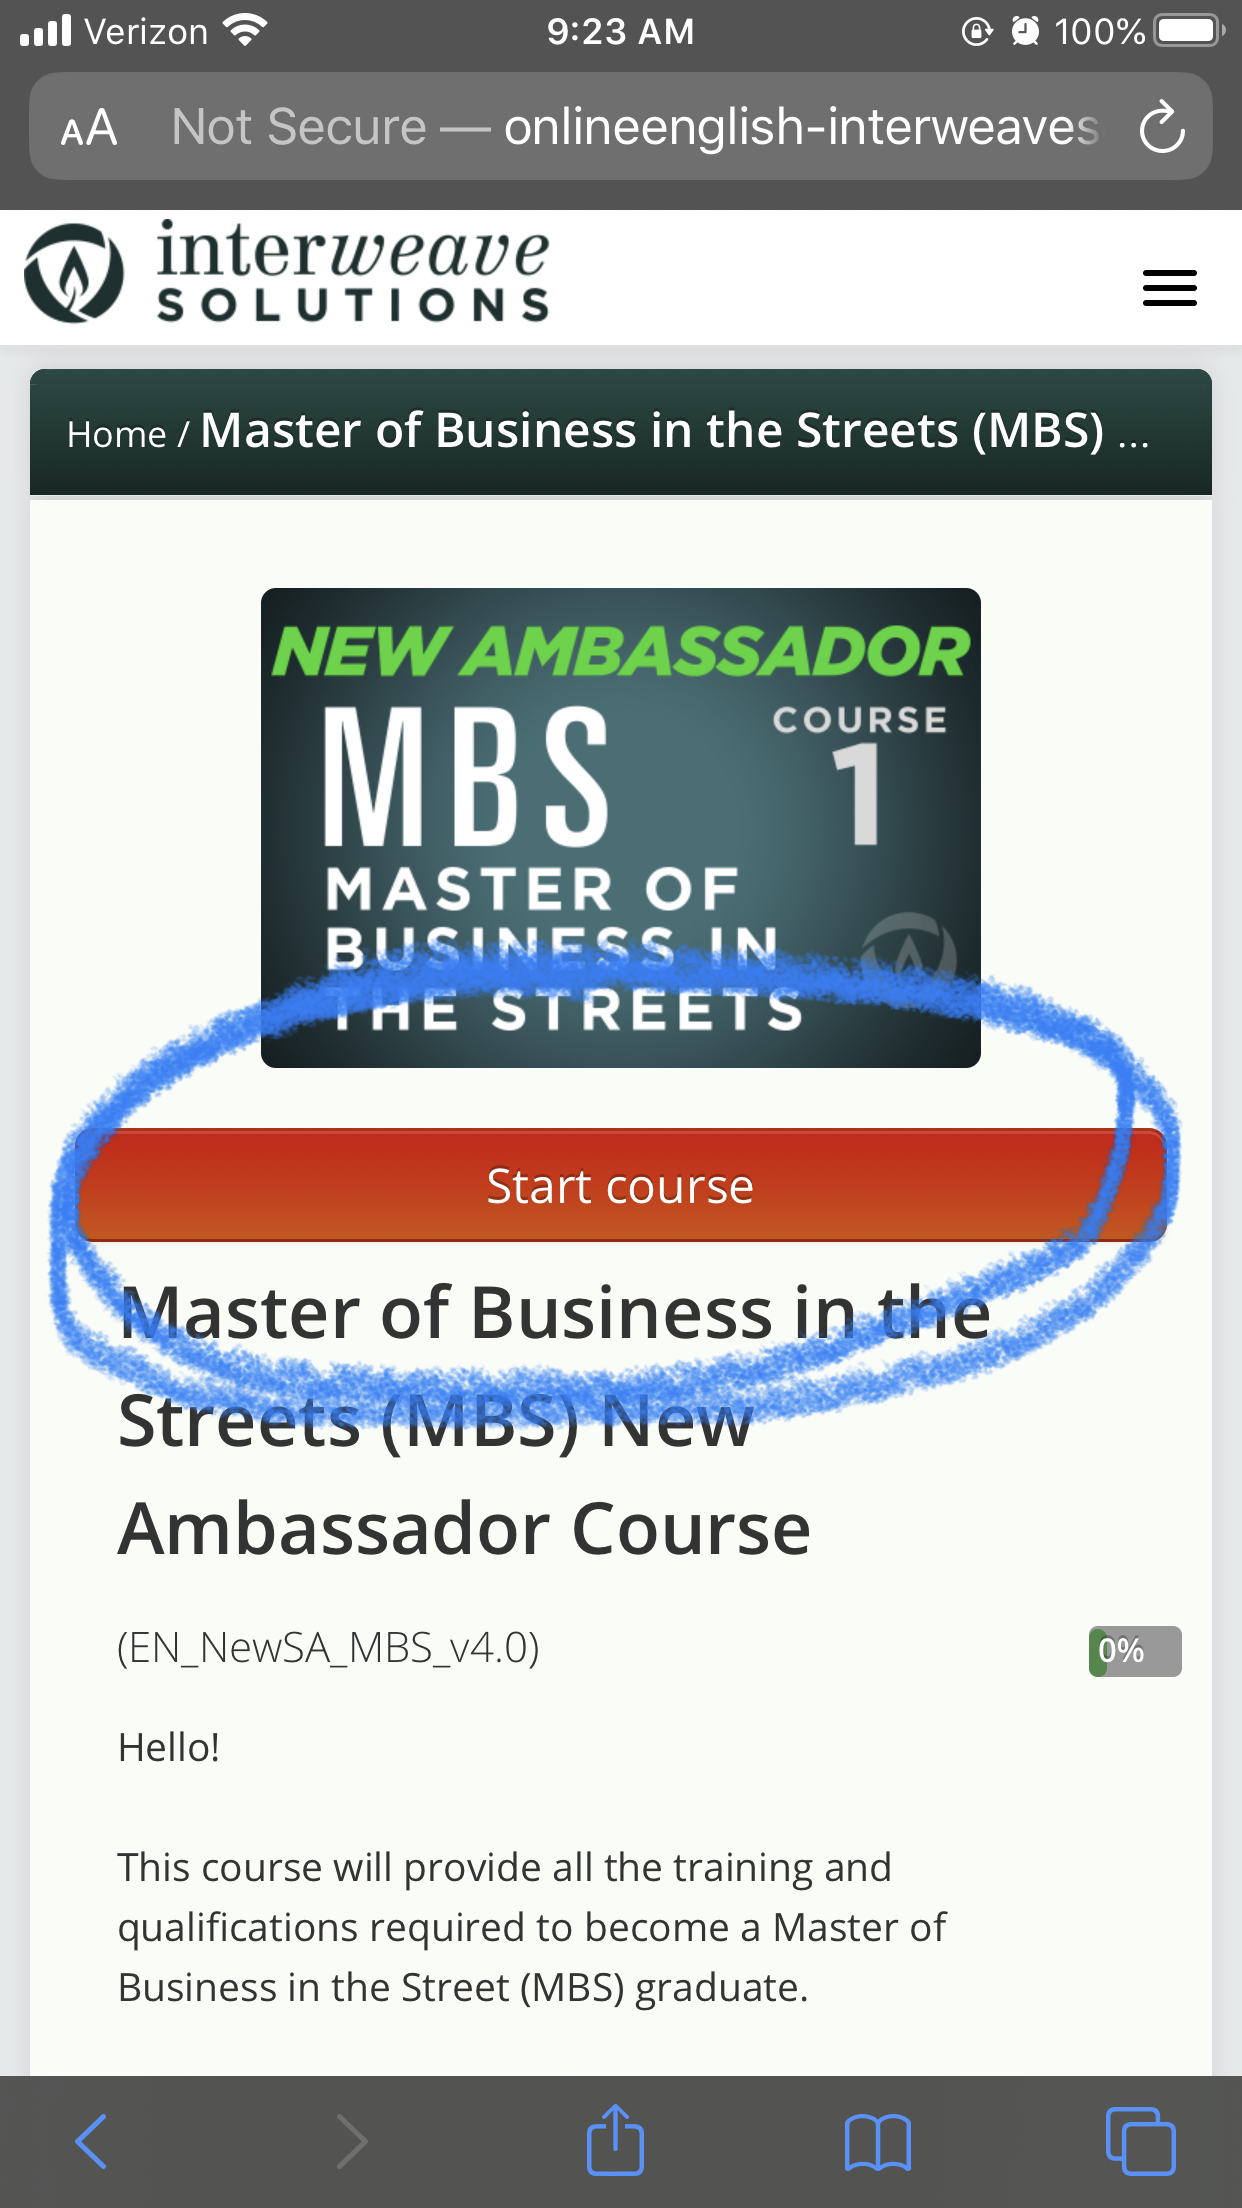 How to start the MBS course